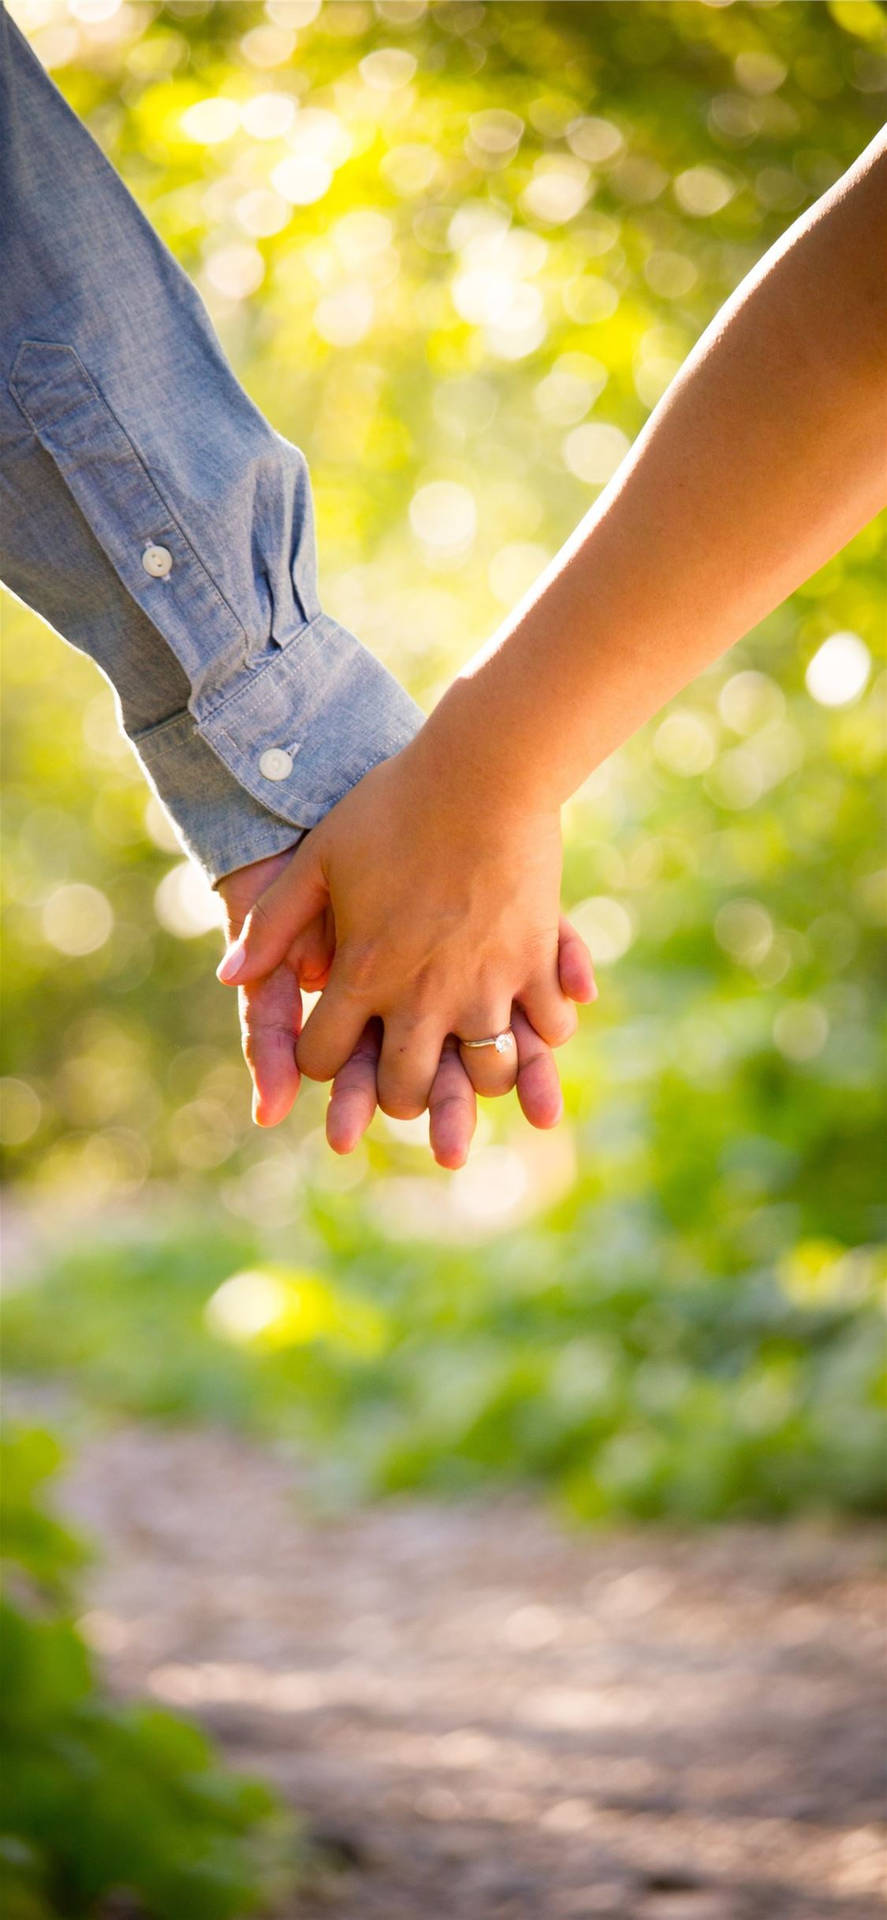 Holding Hands In Green Grass And Leaves